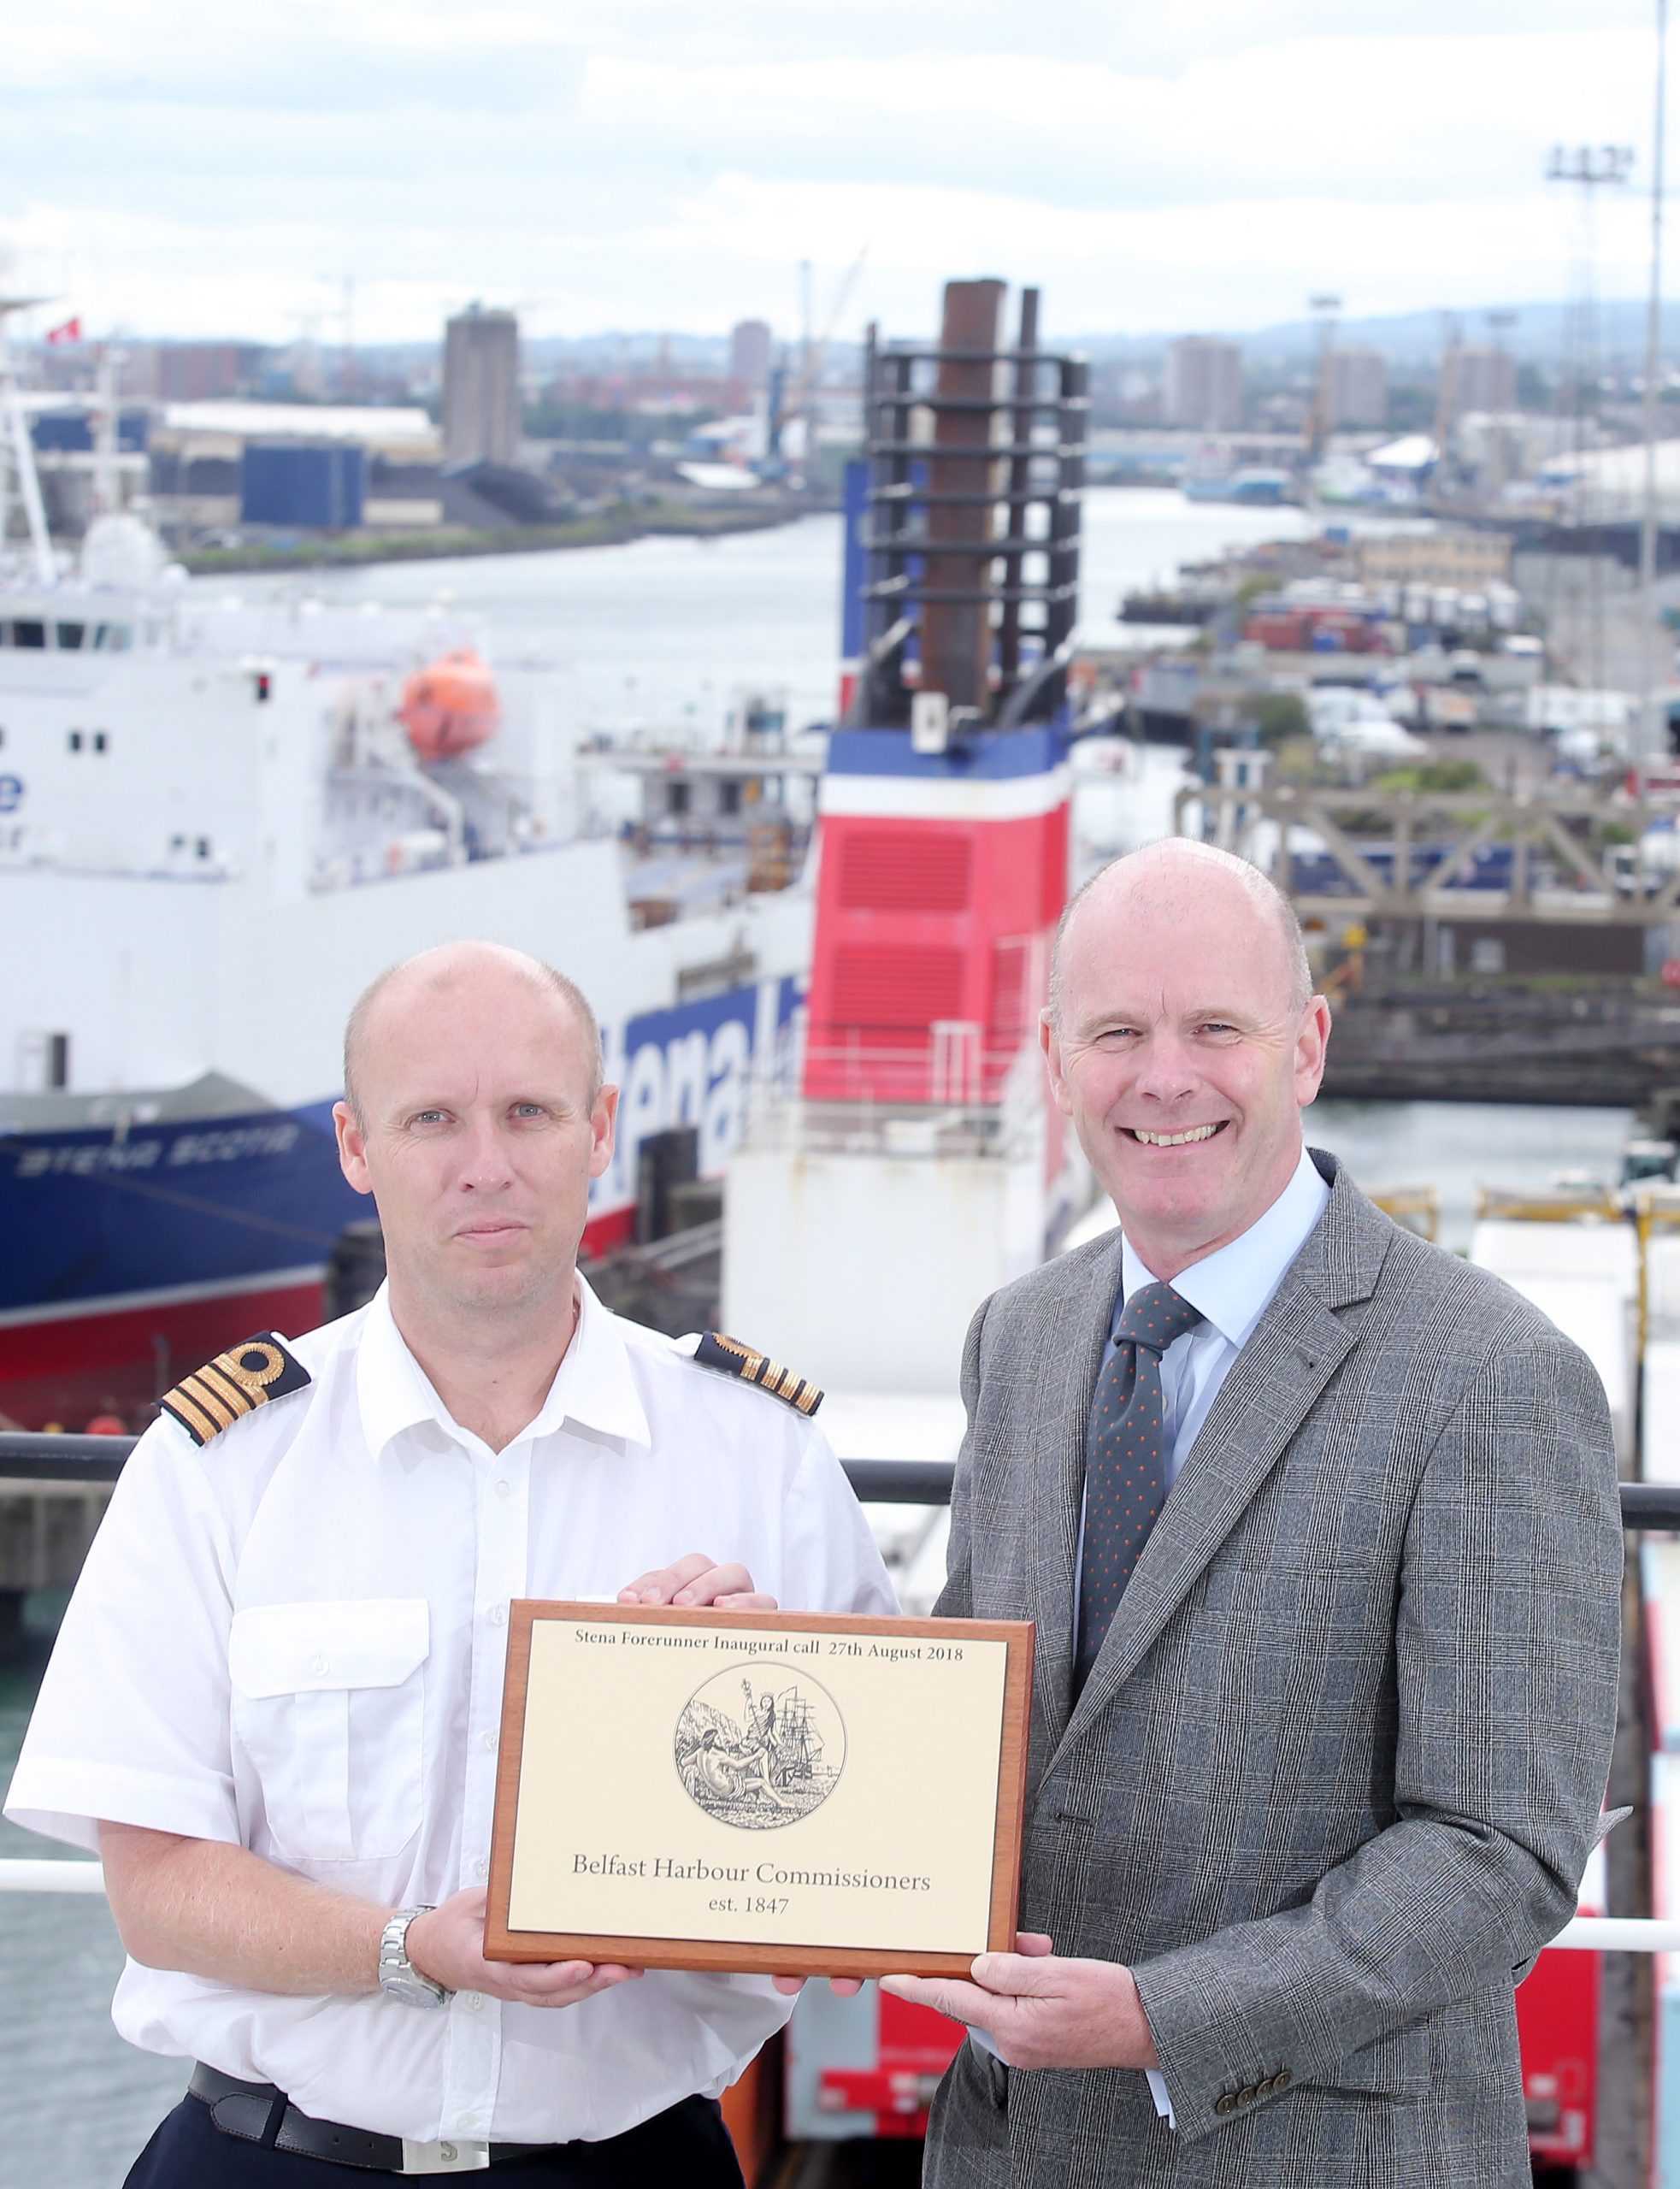 Belfast Harbour is Delighted to Welcome Stena Forerunner to Belfast